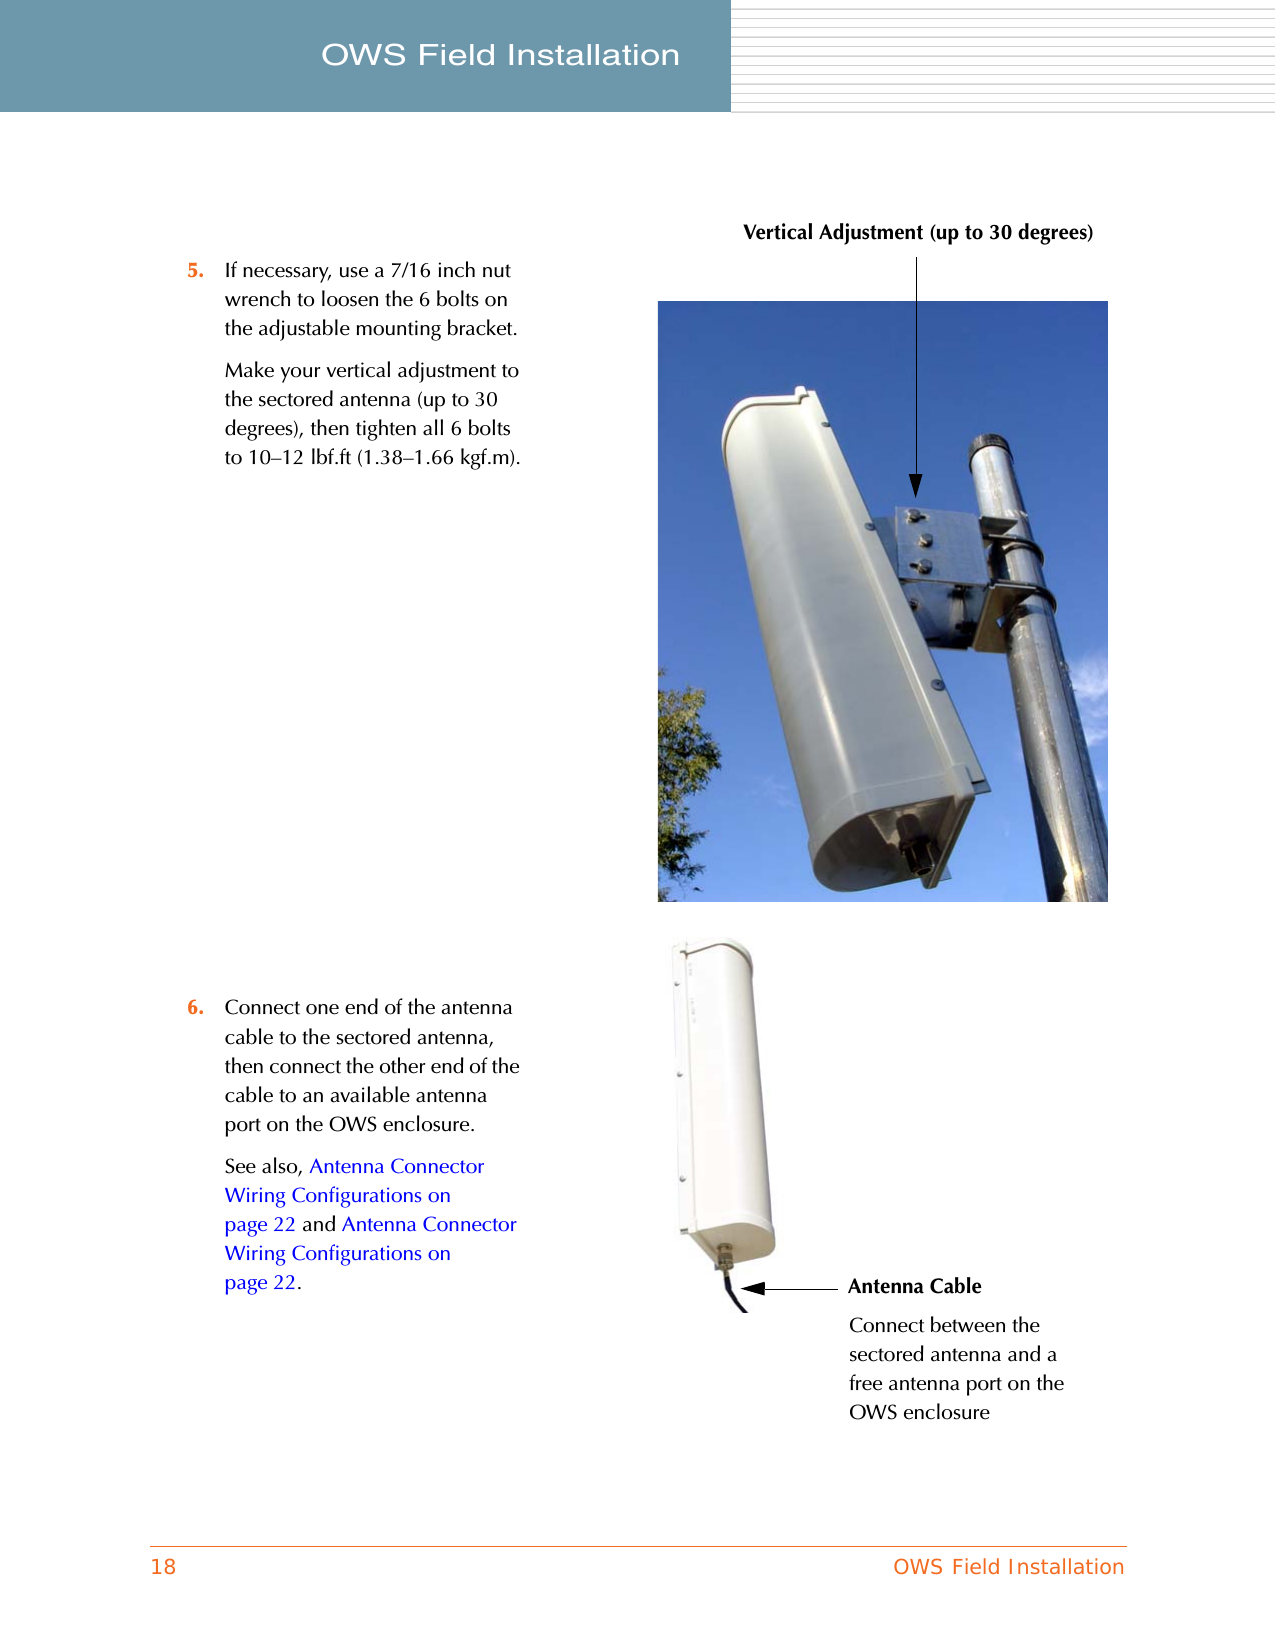 18 OWS Field InstallationOWS Field Installation     5. If necessary, use a 7/16 inch nut wrench to loosen the 6 bolts on the adjustable mounting bracket.Make your vertical adjustment to the sectored antenna (up to 30 degrees), then tighten all 6 bolts to 10–12 lbf.ft (1.38–1.66 kgf.m).6. Connect one end of the antenna cable to the sectored antenna, then connect the other end of the cable to an available antenna port on the OWS enclosure.See also, Antenna Connector Wiring Configurations on page 22 and Antenna Connector Wiring Configurations on page 22.Vertical Adjustment (up to 30 degrees)Antenna CableConnect between the sectored antenna and a free antenna port on the OWS enclosure